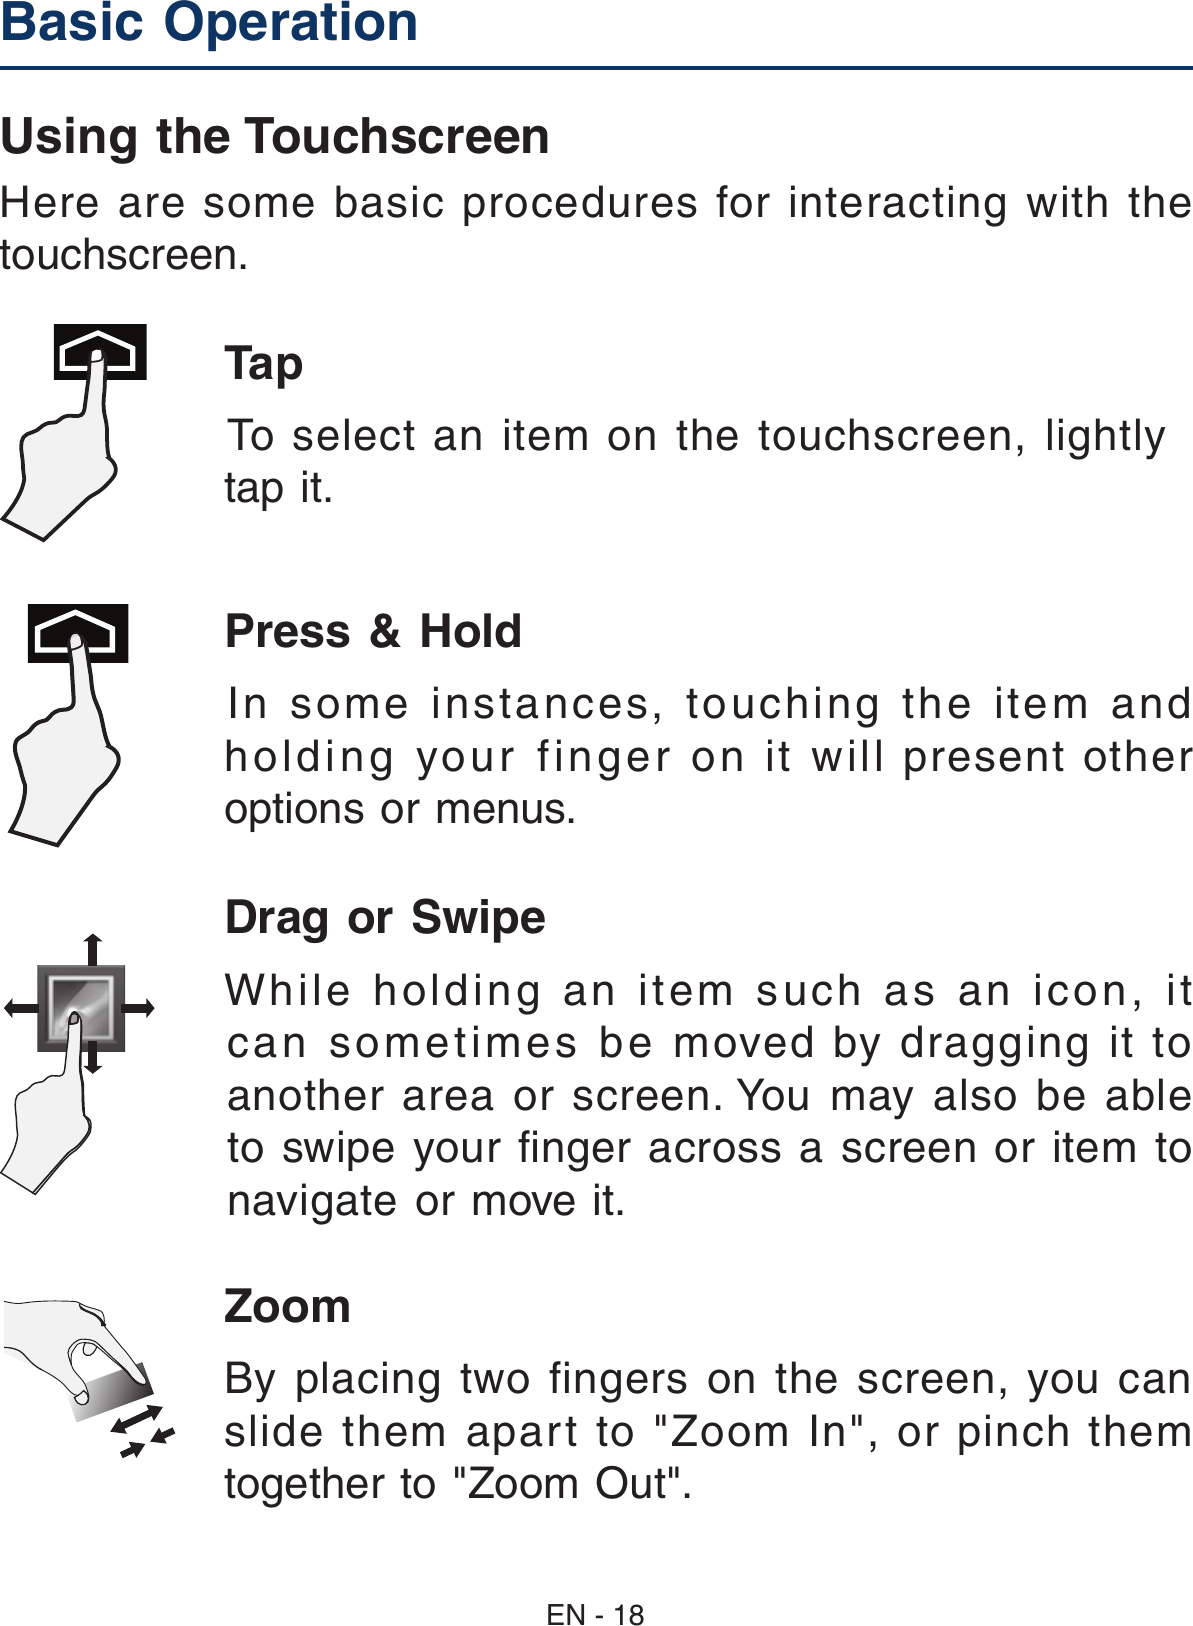 Drag or Swipe While holding an item such as an icon, it can sometimes be moved by dragging it to another  area  or screen. You  may  also  be able to swipe your ﬁnger across a screen or item to navigate or move it. Zoom By placing  two  fingers on the  screen,  you  can slide  them  apart  to  &quot;Zoom  In&quot;,  or  pinch  them together to &quot;Zoom Out&quot;. Basic Operation Using the TouchscreenHere are some basic procedures for interacting with the touchscreen.Tap  To select an item on the touchscreen, lightly tap it. Press &amp; Hold In some instances, touching the item and holding your finger on it will present other options or menus. EN - 18